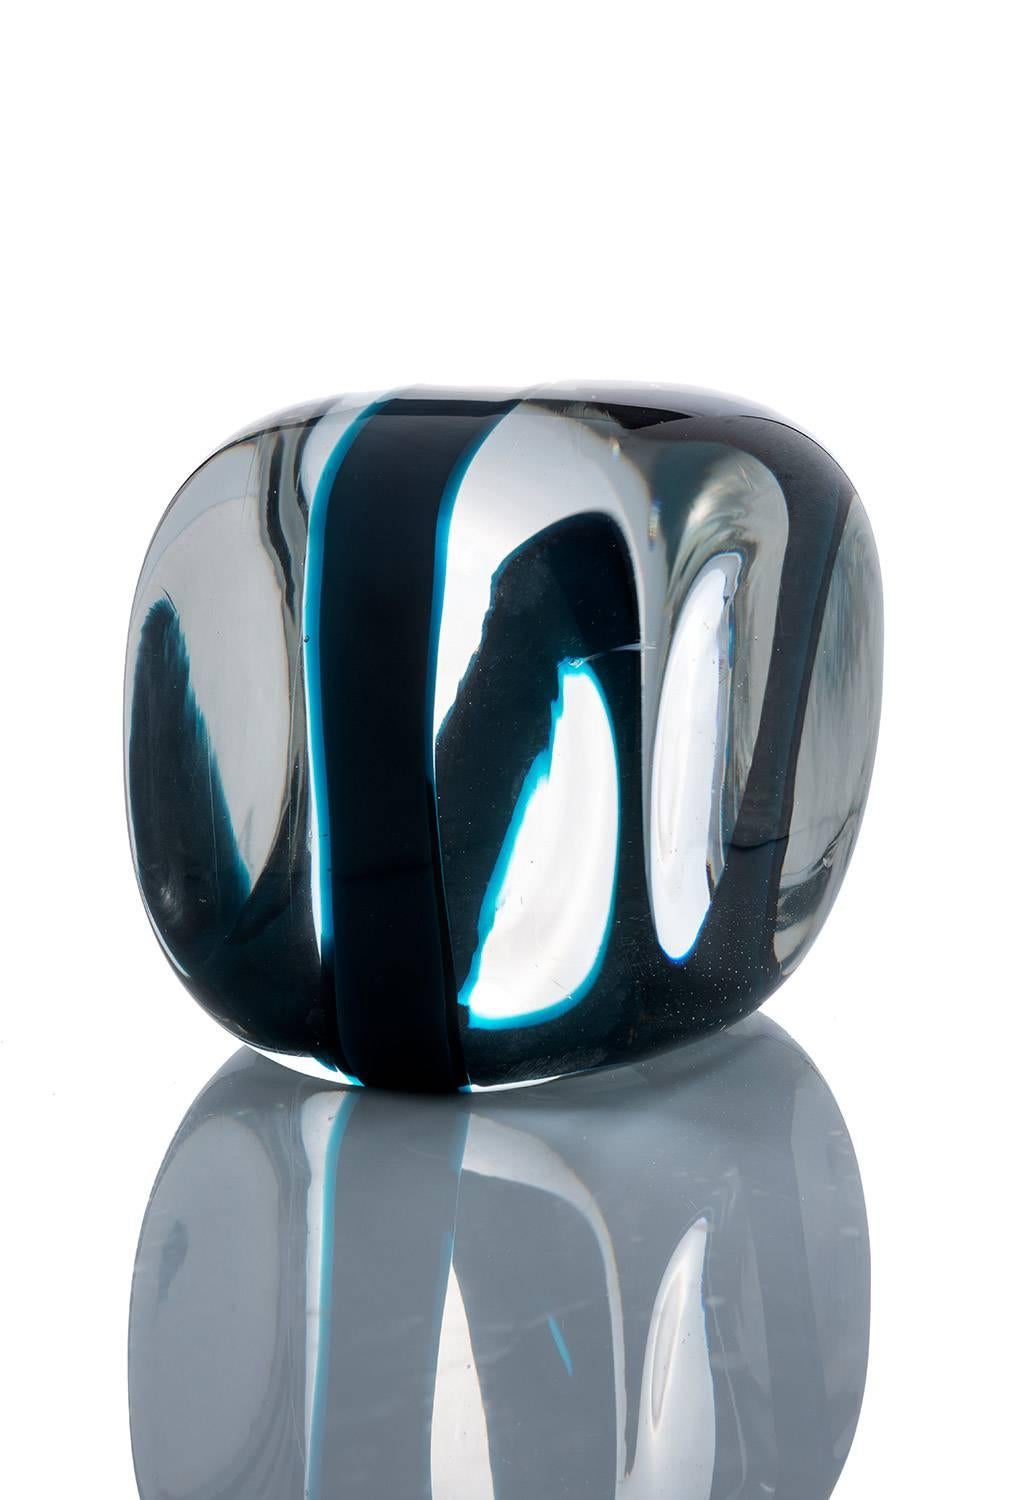 Elegant glass paperweight designed by Pierre Cardin for Venini, circa 1968.
Clear glass with a striking blue detail. Substantial in weight and size, measuring 12.5cm all ways.